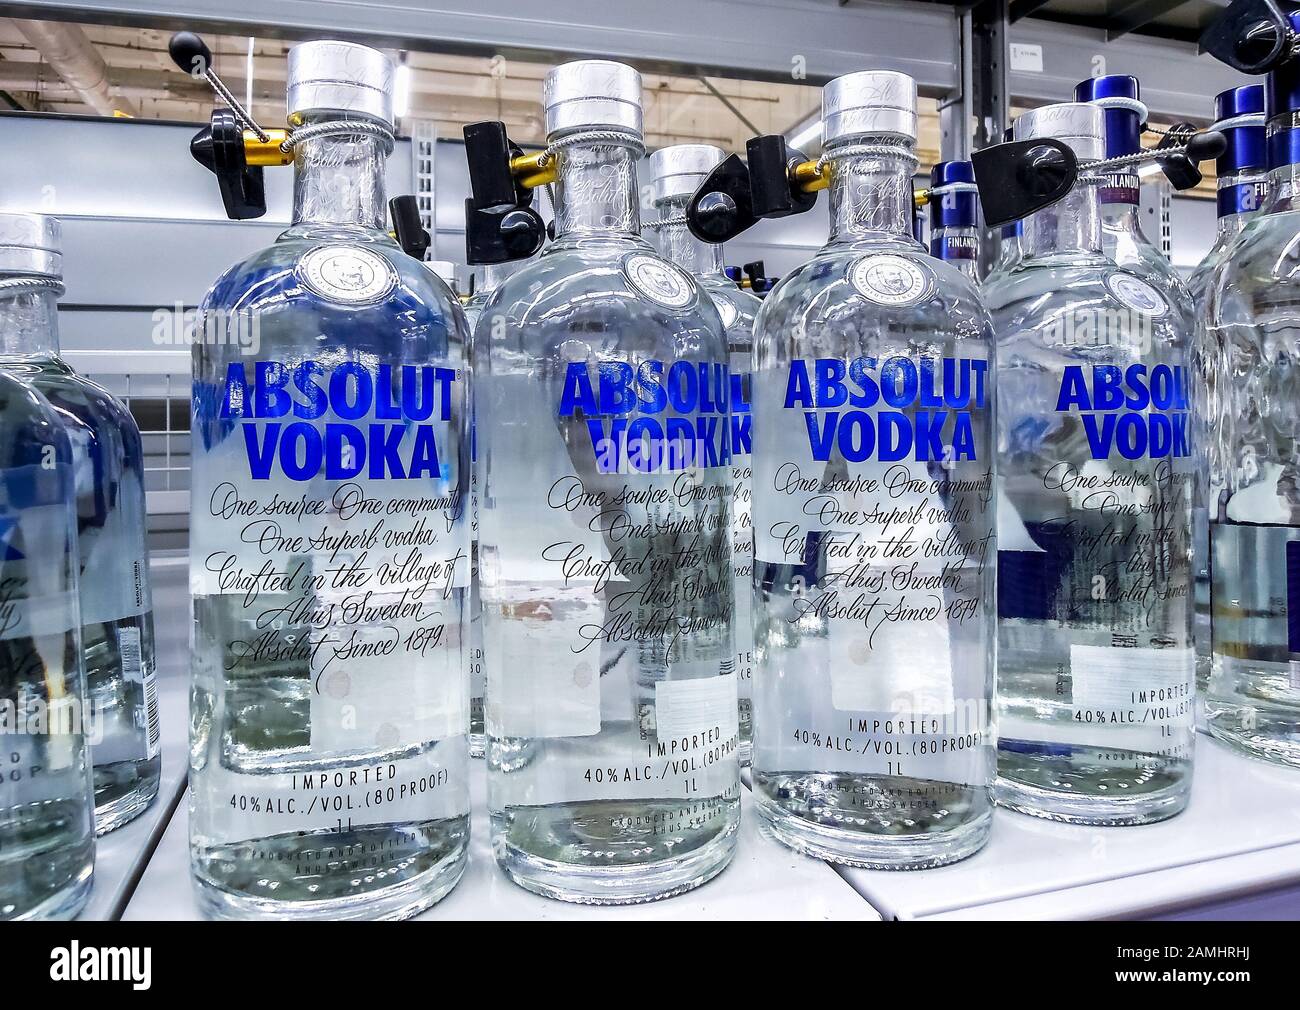 Samara, Russia - January 12, 2020: Absolut Vodka ready for sale on the shelf in superstore. Swedish brand of vodka is popular in Russia and all over t Stock Photo